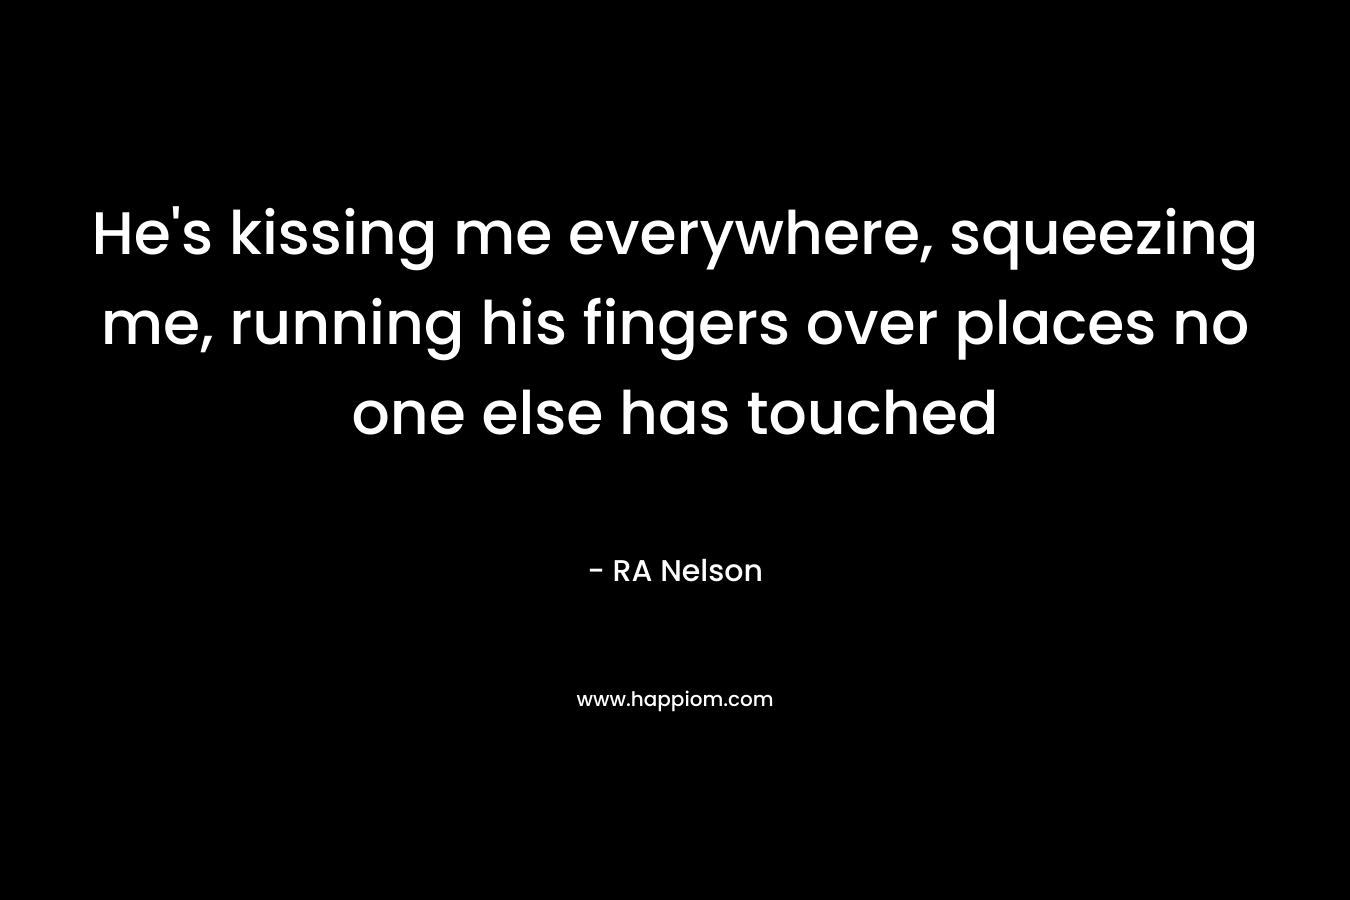 He’s kissing me everywhere, squeezing me, running his fingers over places no one else has touched – RA Nelson